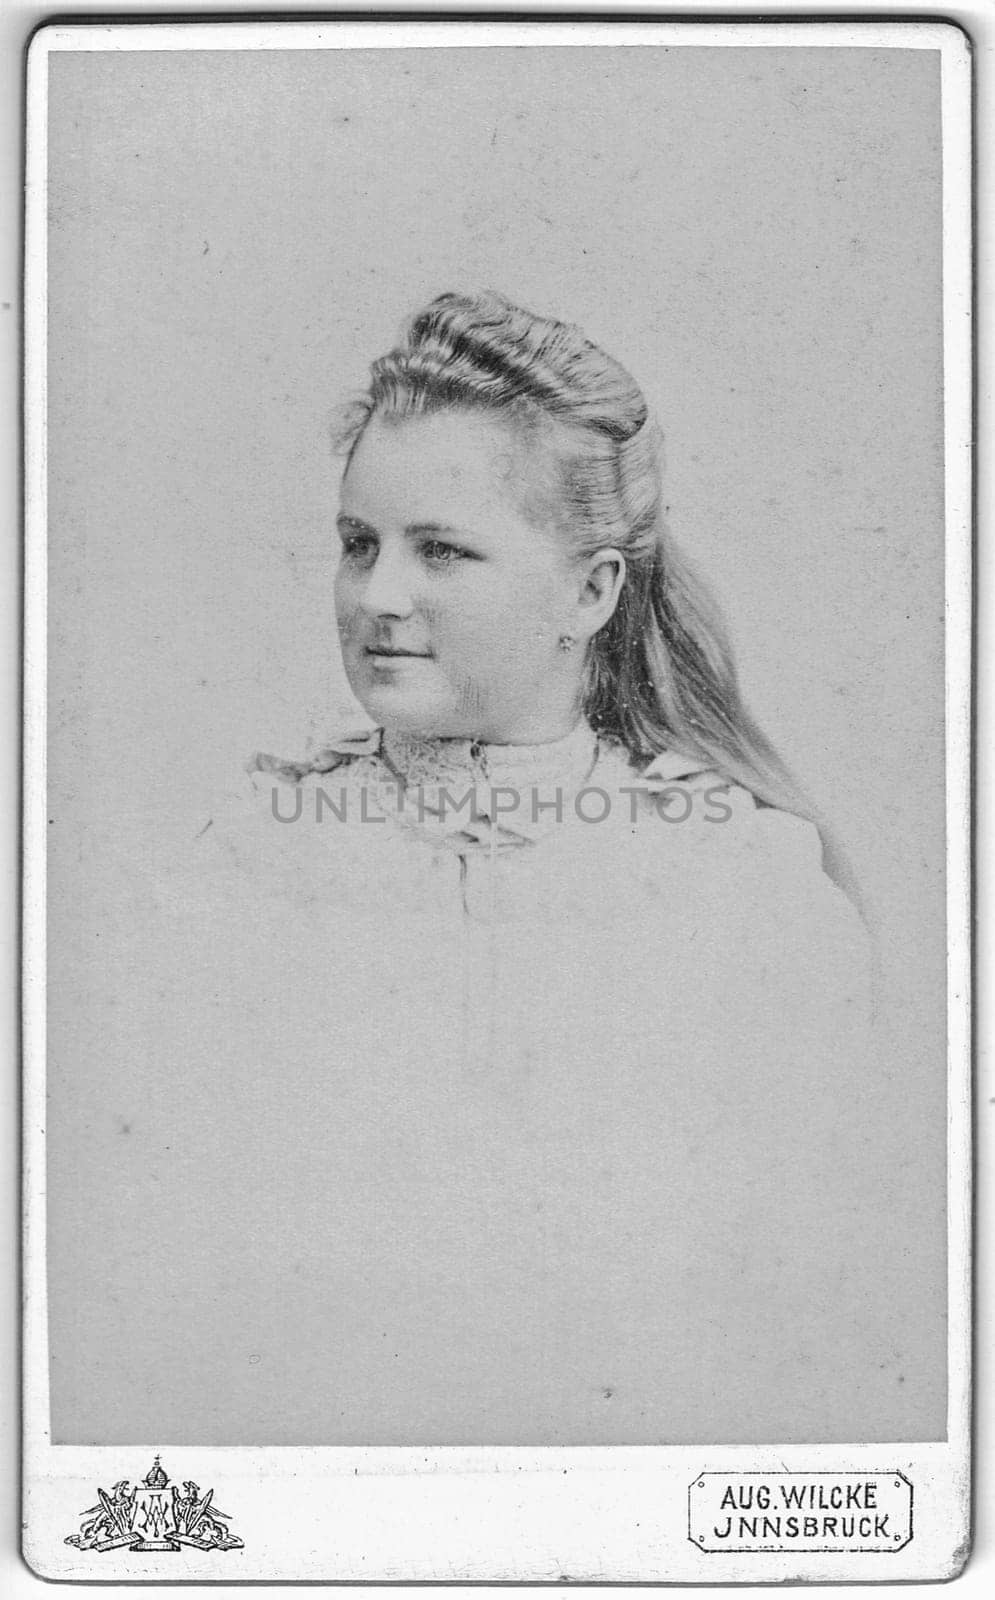 JNNSBRUCK - INNSBRUCK, AUSTRIA - HUNGARY - CIRCA 1910: Vintage cabinet card shows portrait of the middle-aged woman. Photo was taken in a photo studio. Edwardian hairstyle. Photo was taken in Austro-Hungarian Empire or also Austro-Hungarian Monarchy.